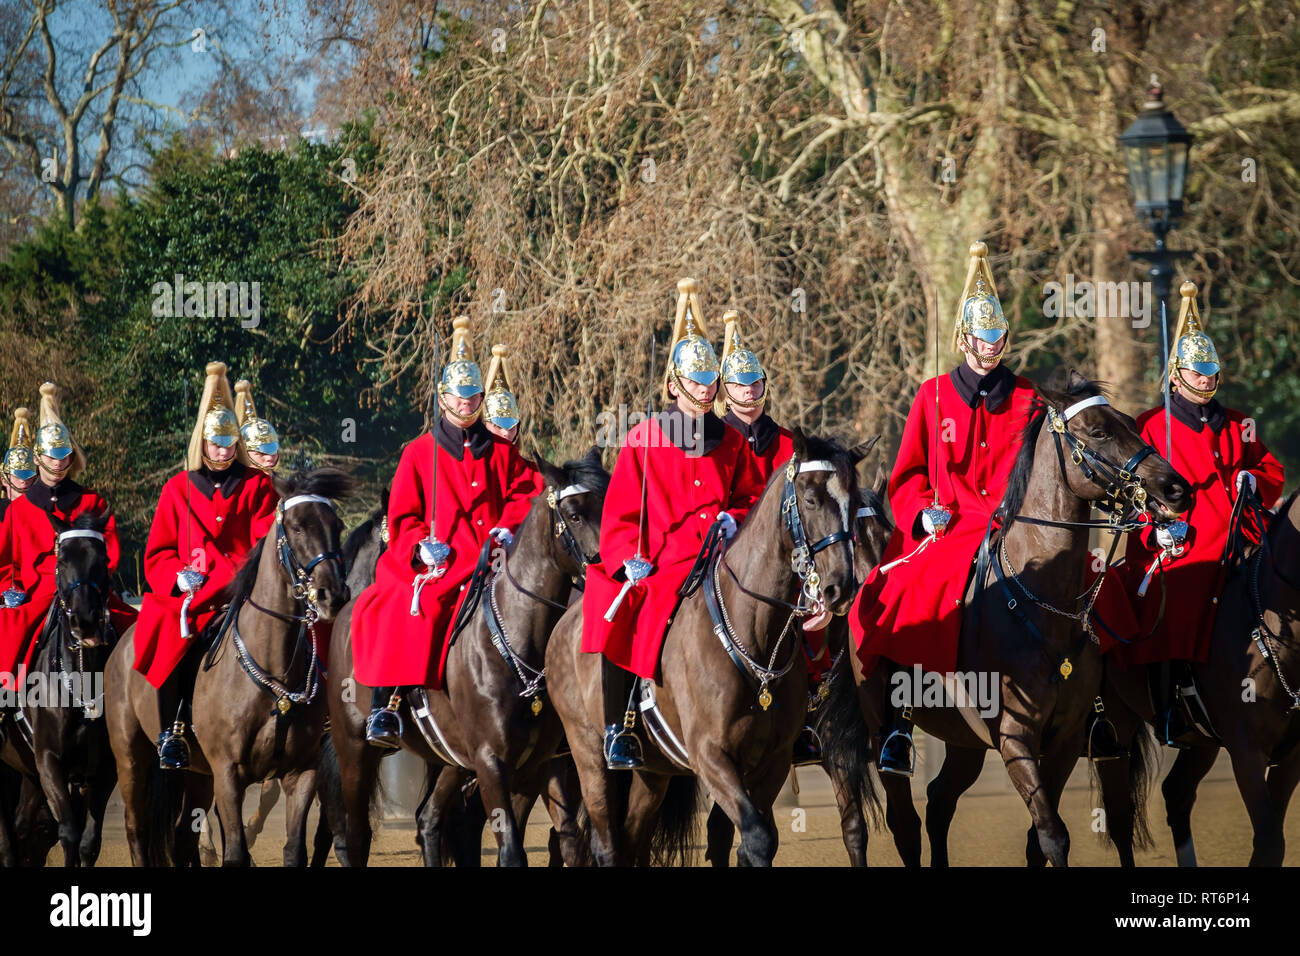 LONDON, UK, February 25, 2019: Horse Guards Parade and changing the guard ceremony in London Stock Photo